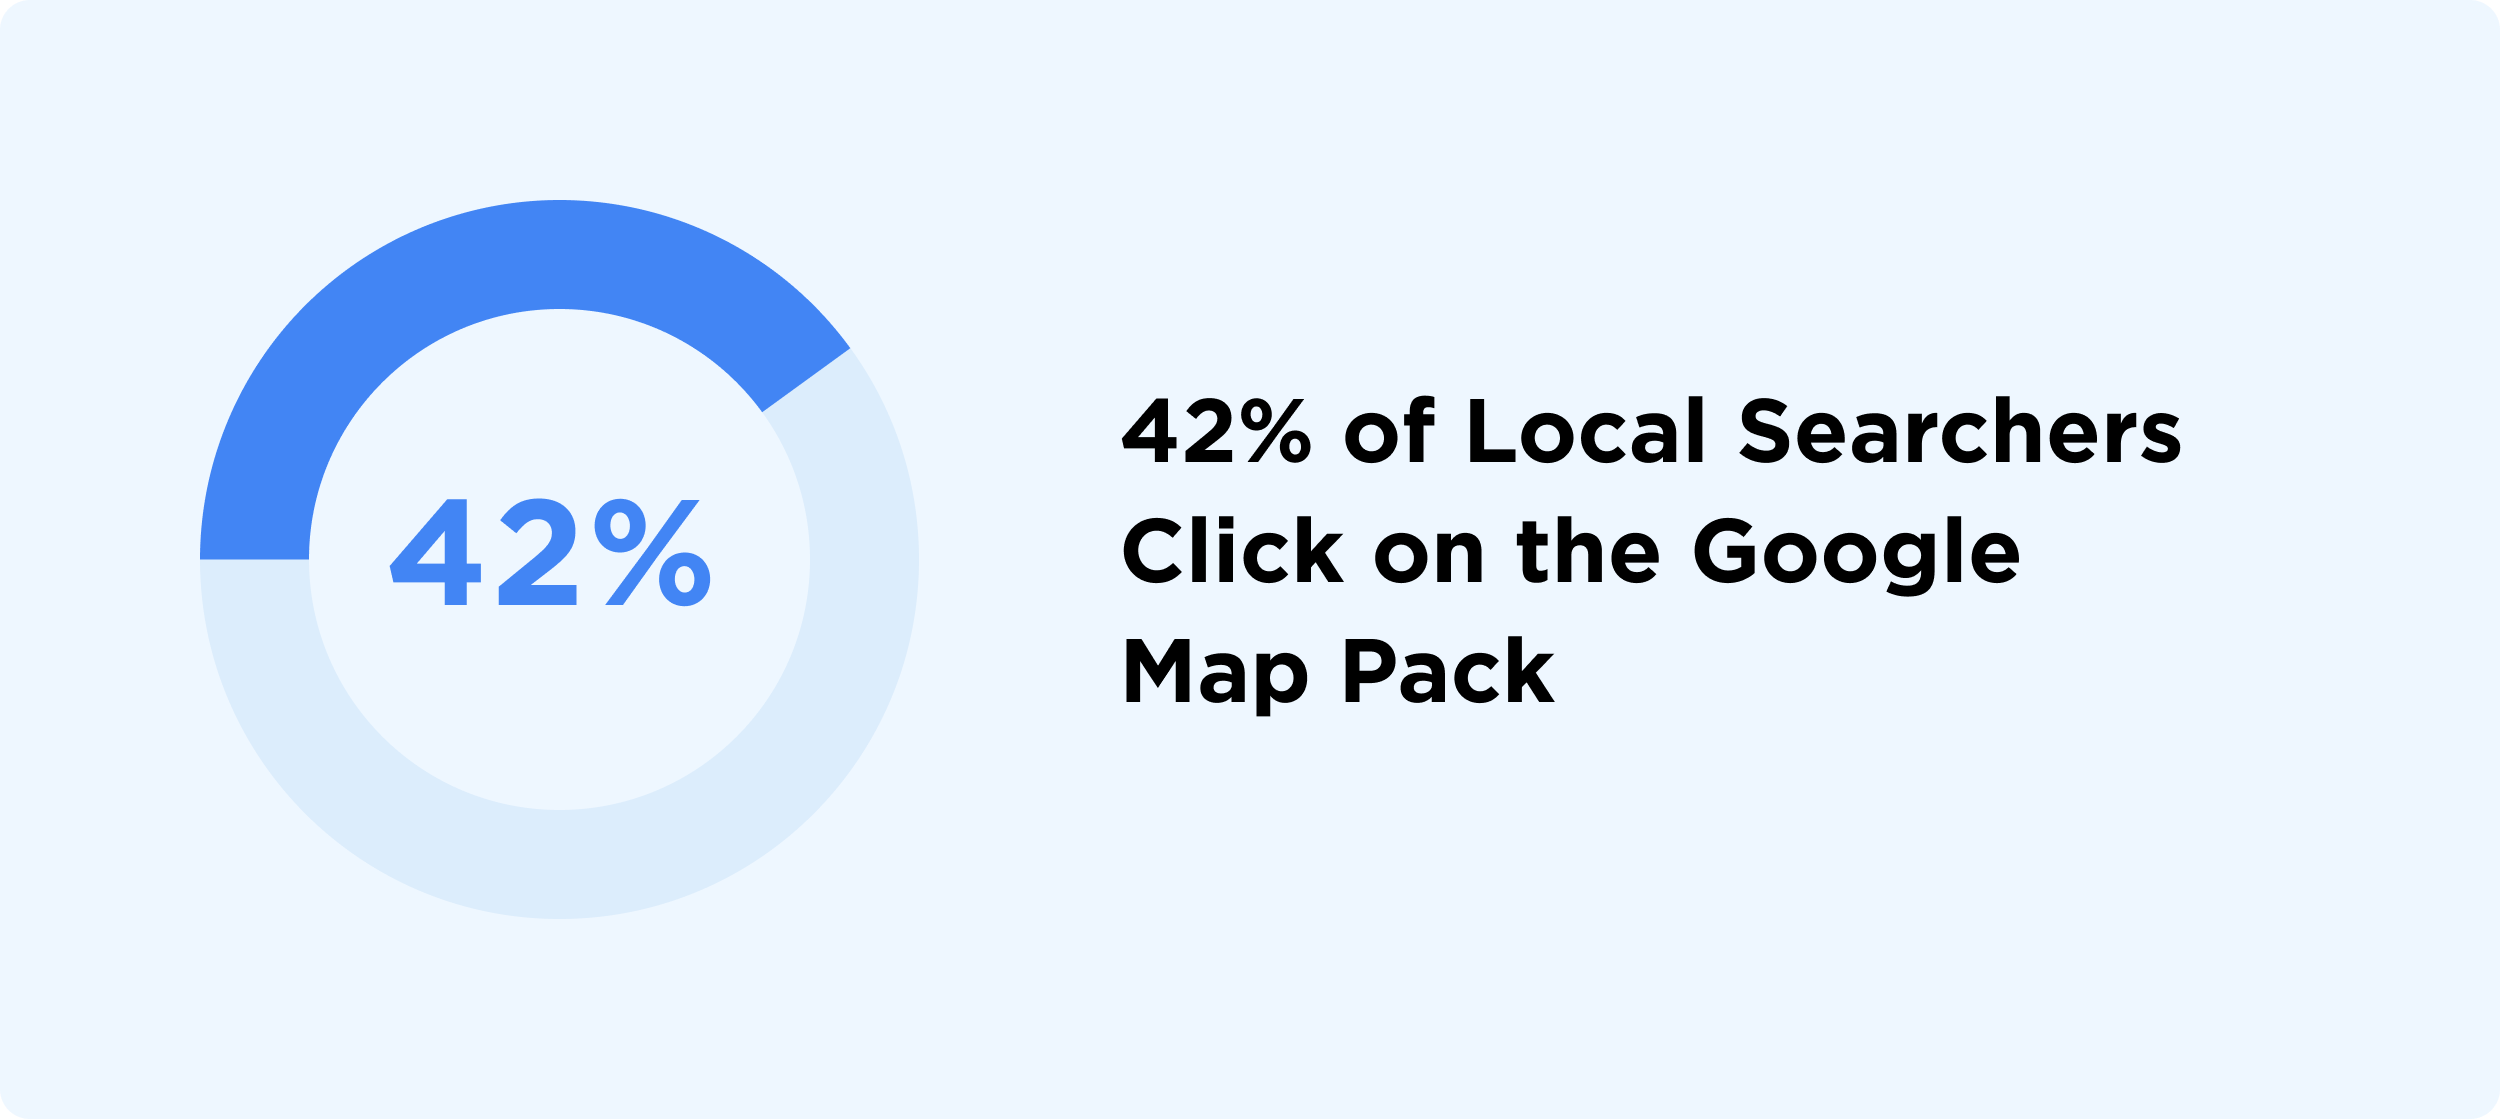 42% of Local Searchers Click On the Google Map Pack